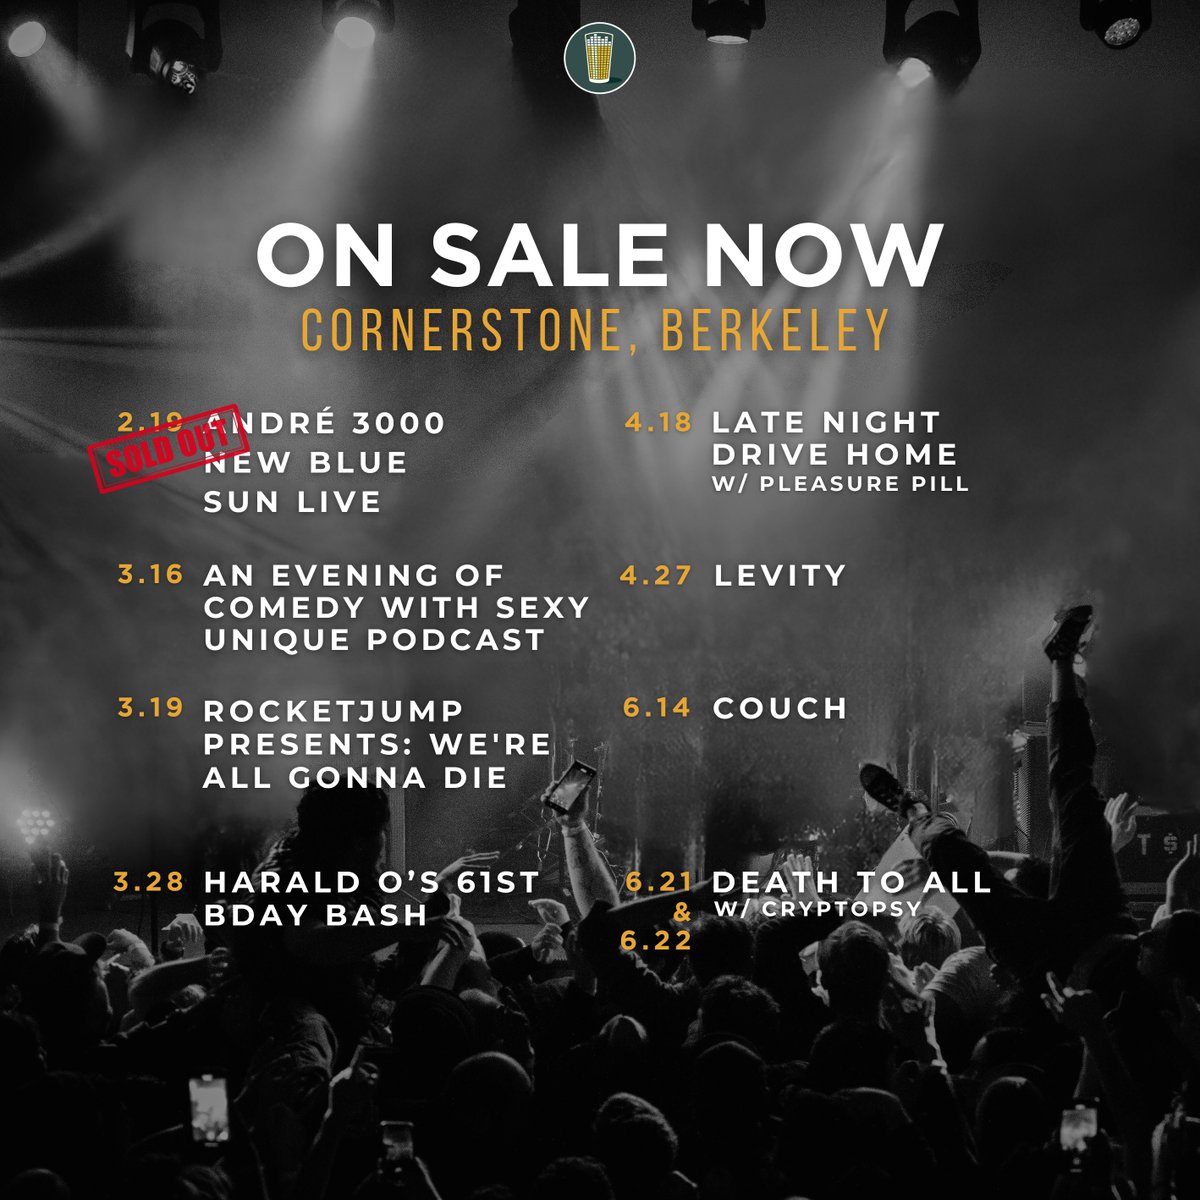 🚨 ON SALE NOW 🚨 2.19 | André 3000 [SOLD OUT] 3.16 | Sexy Unique Podcast Live 3.19 | We're All Gonna Die 3.28 | Harald O's 61st Bday Bash 4.18 | Late Night Drive Home 4.27 | Levity 6.14 | Couch 6.21 & 6.22 | Death To All 🎟 Tickets available at cornerstoneberkeley.com